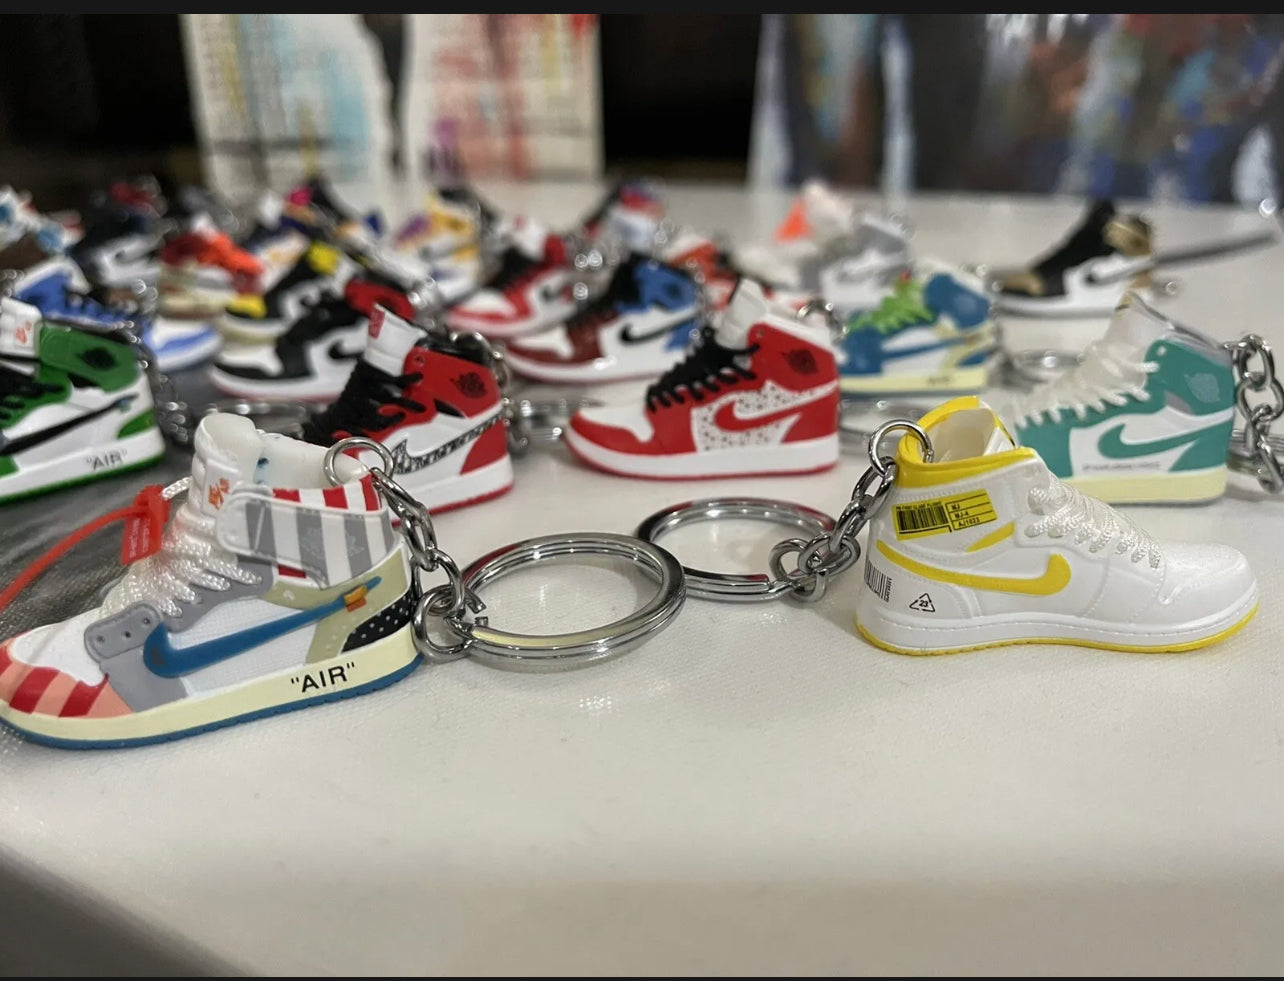 Wholesale mini sneaker keychain wholesale To Carry/Hold Your Keys 